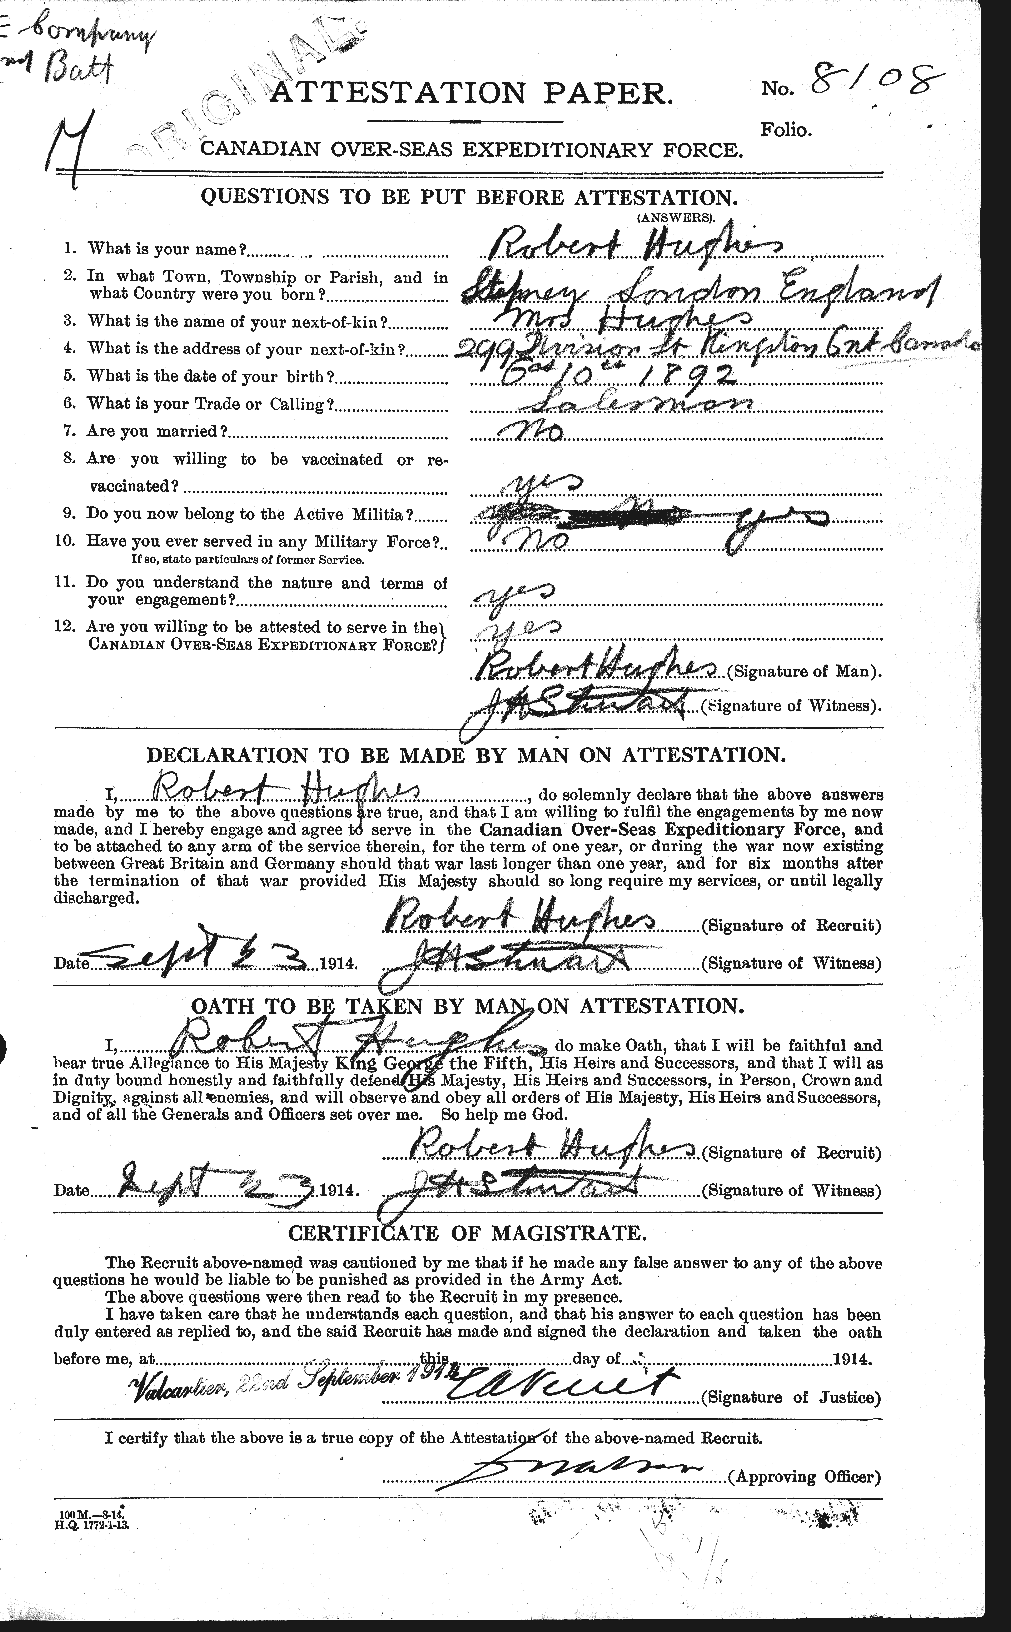 Personnel Records of the First World War - CEF 406605a